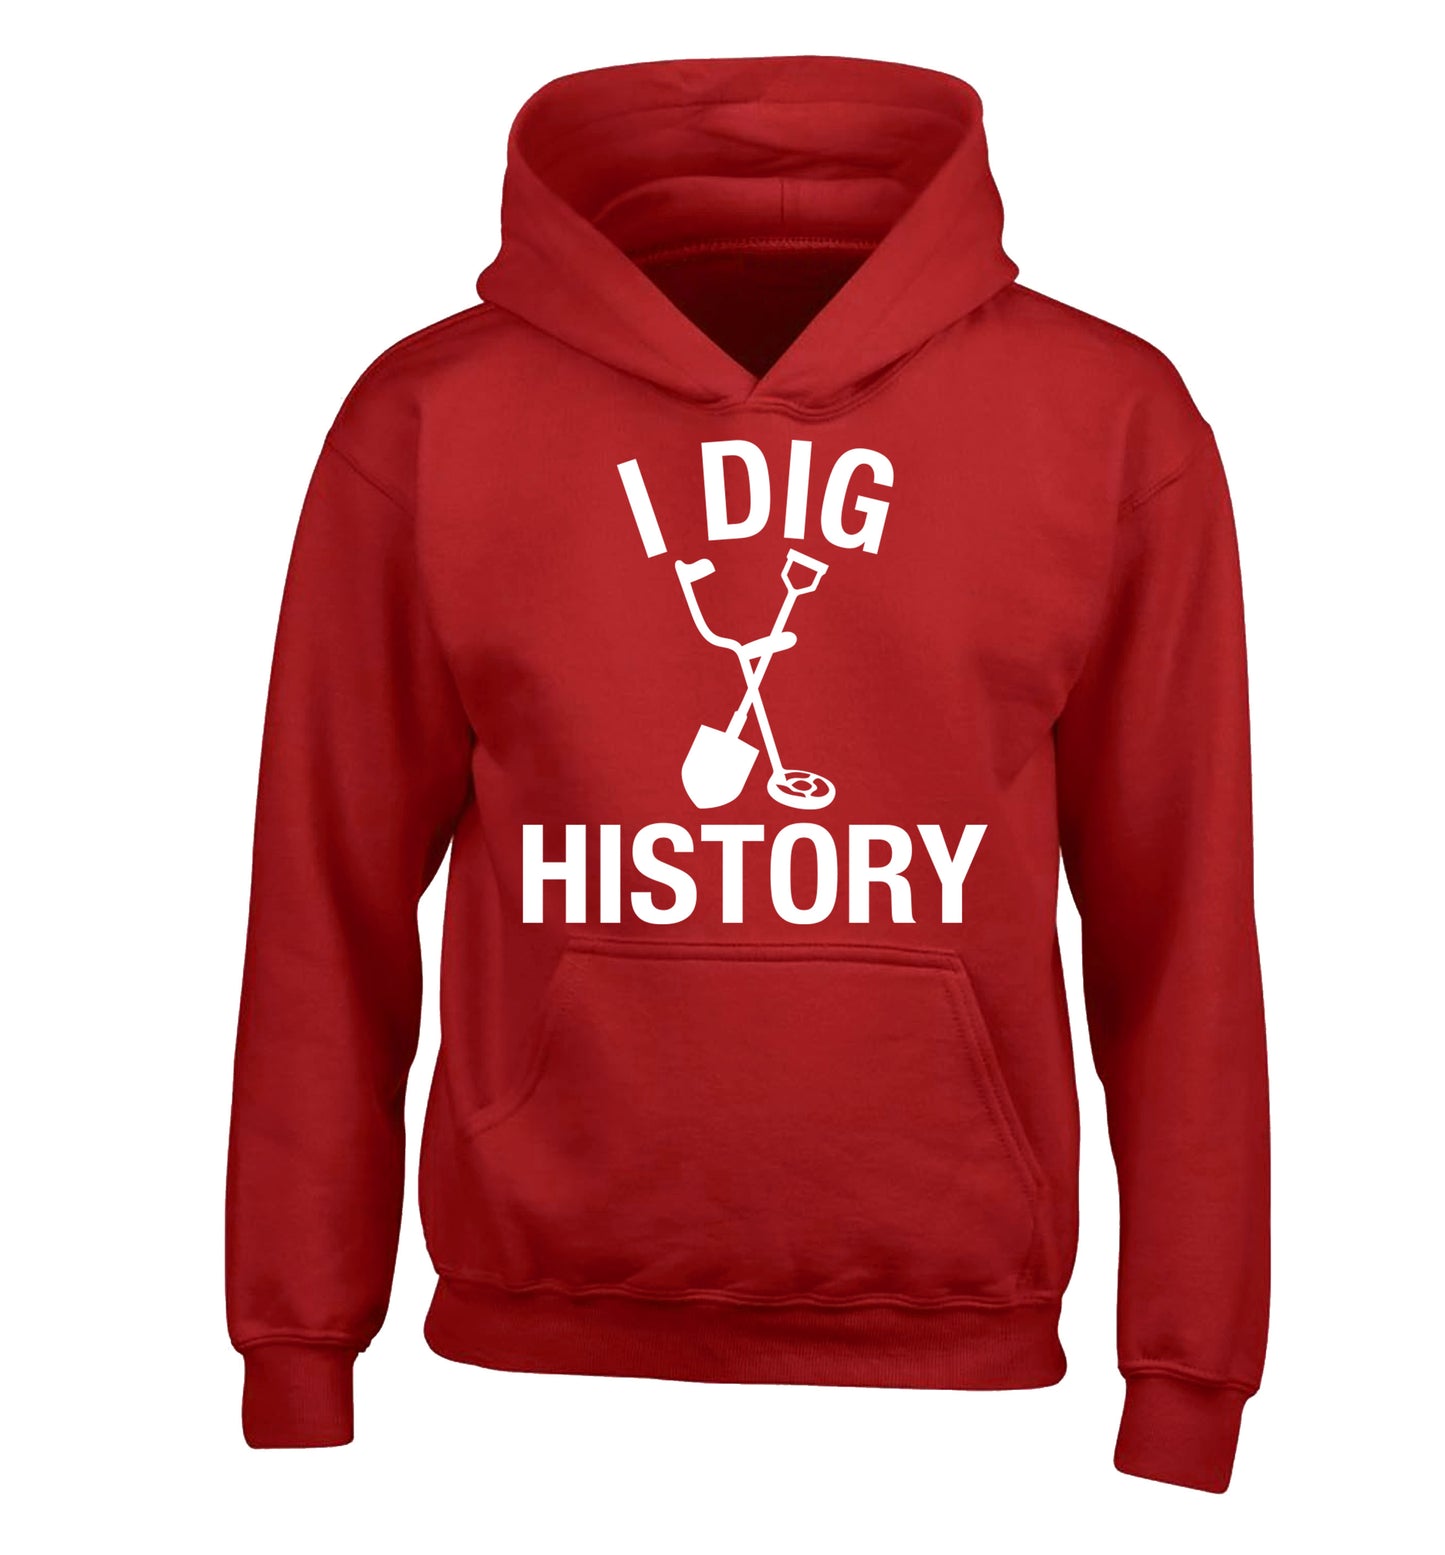 I dig history children's red hoodie 12-13 Years